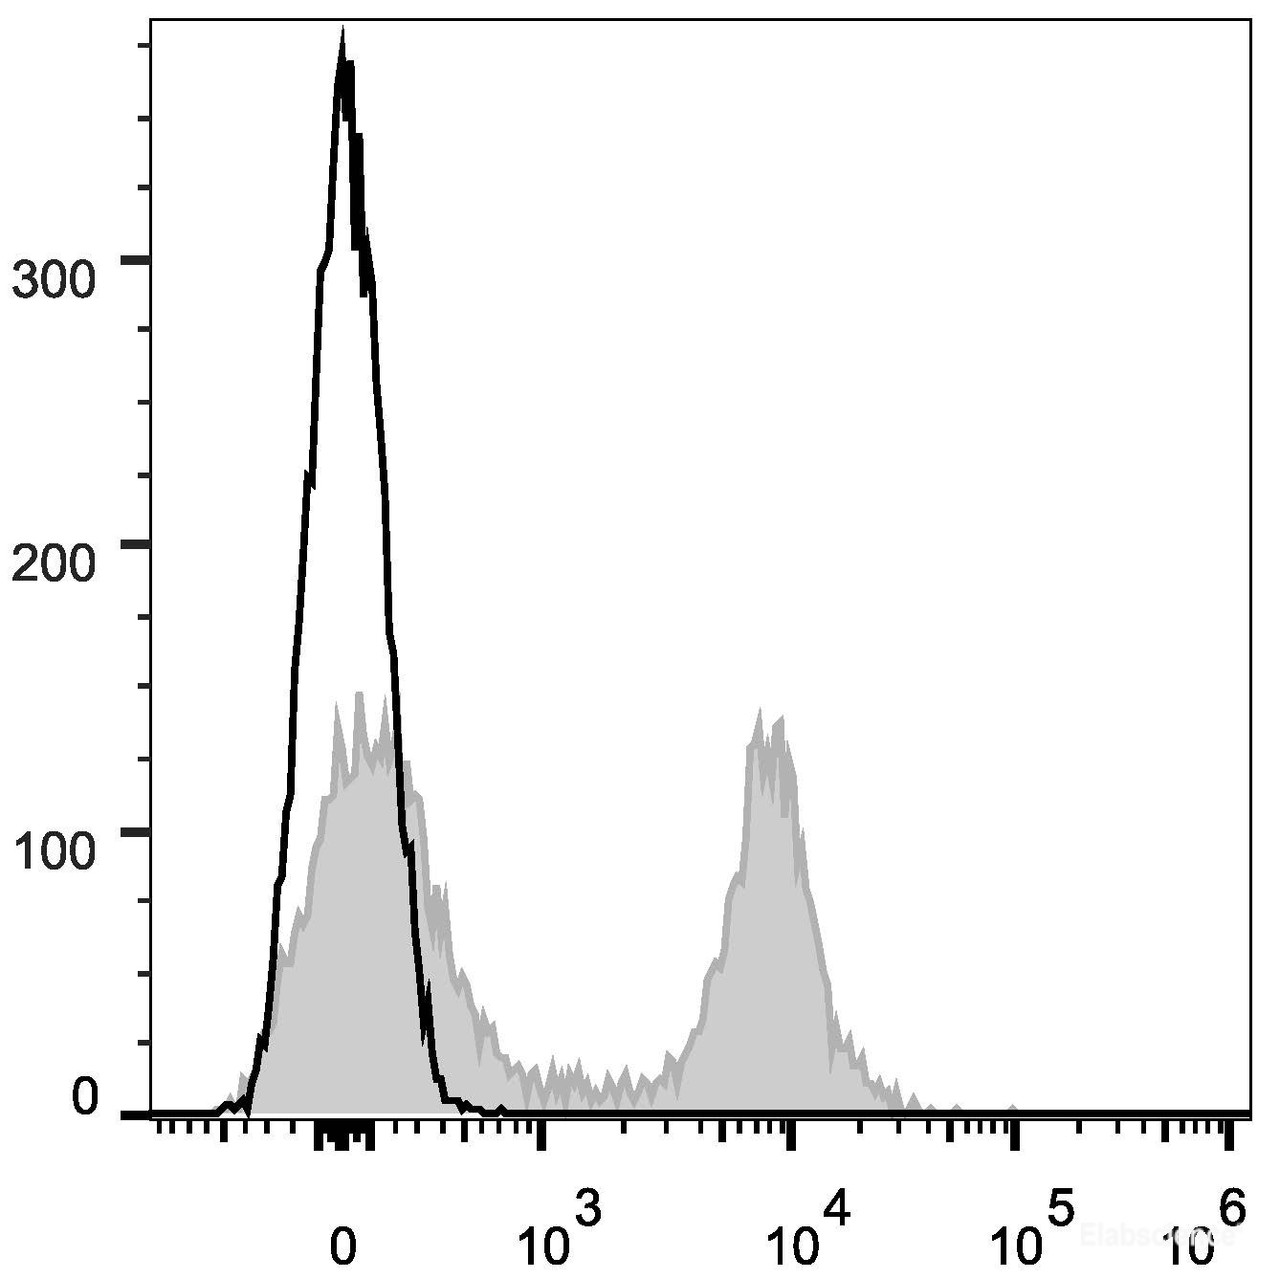 C57BL/6 murine splenocytes are stained with APC Anti-Mouse CD16/32 Antibody[Used at .2 μg/1<sup>6</sup> cells dilution](filled gray histogram). Unstained splenocytes (empty black histogram) are used as control.